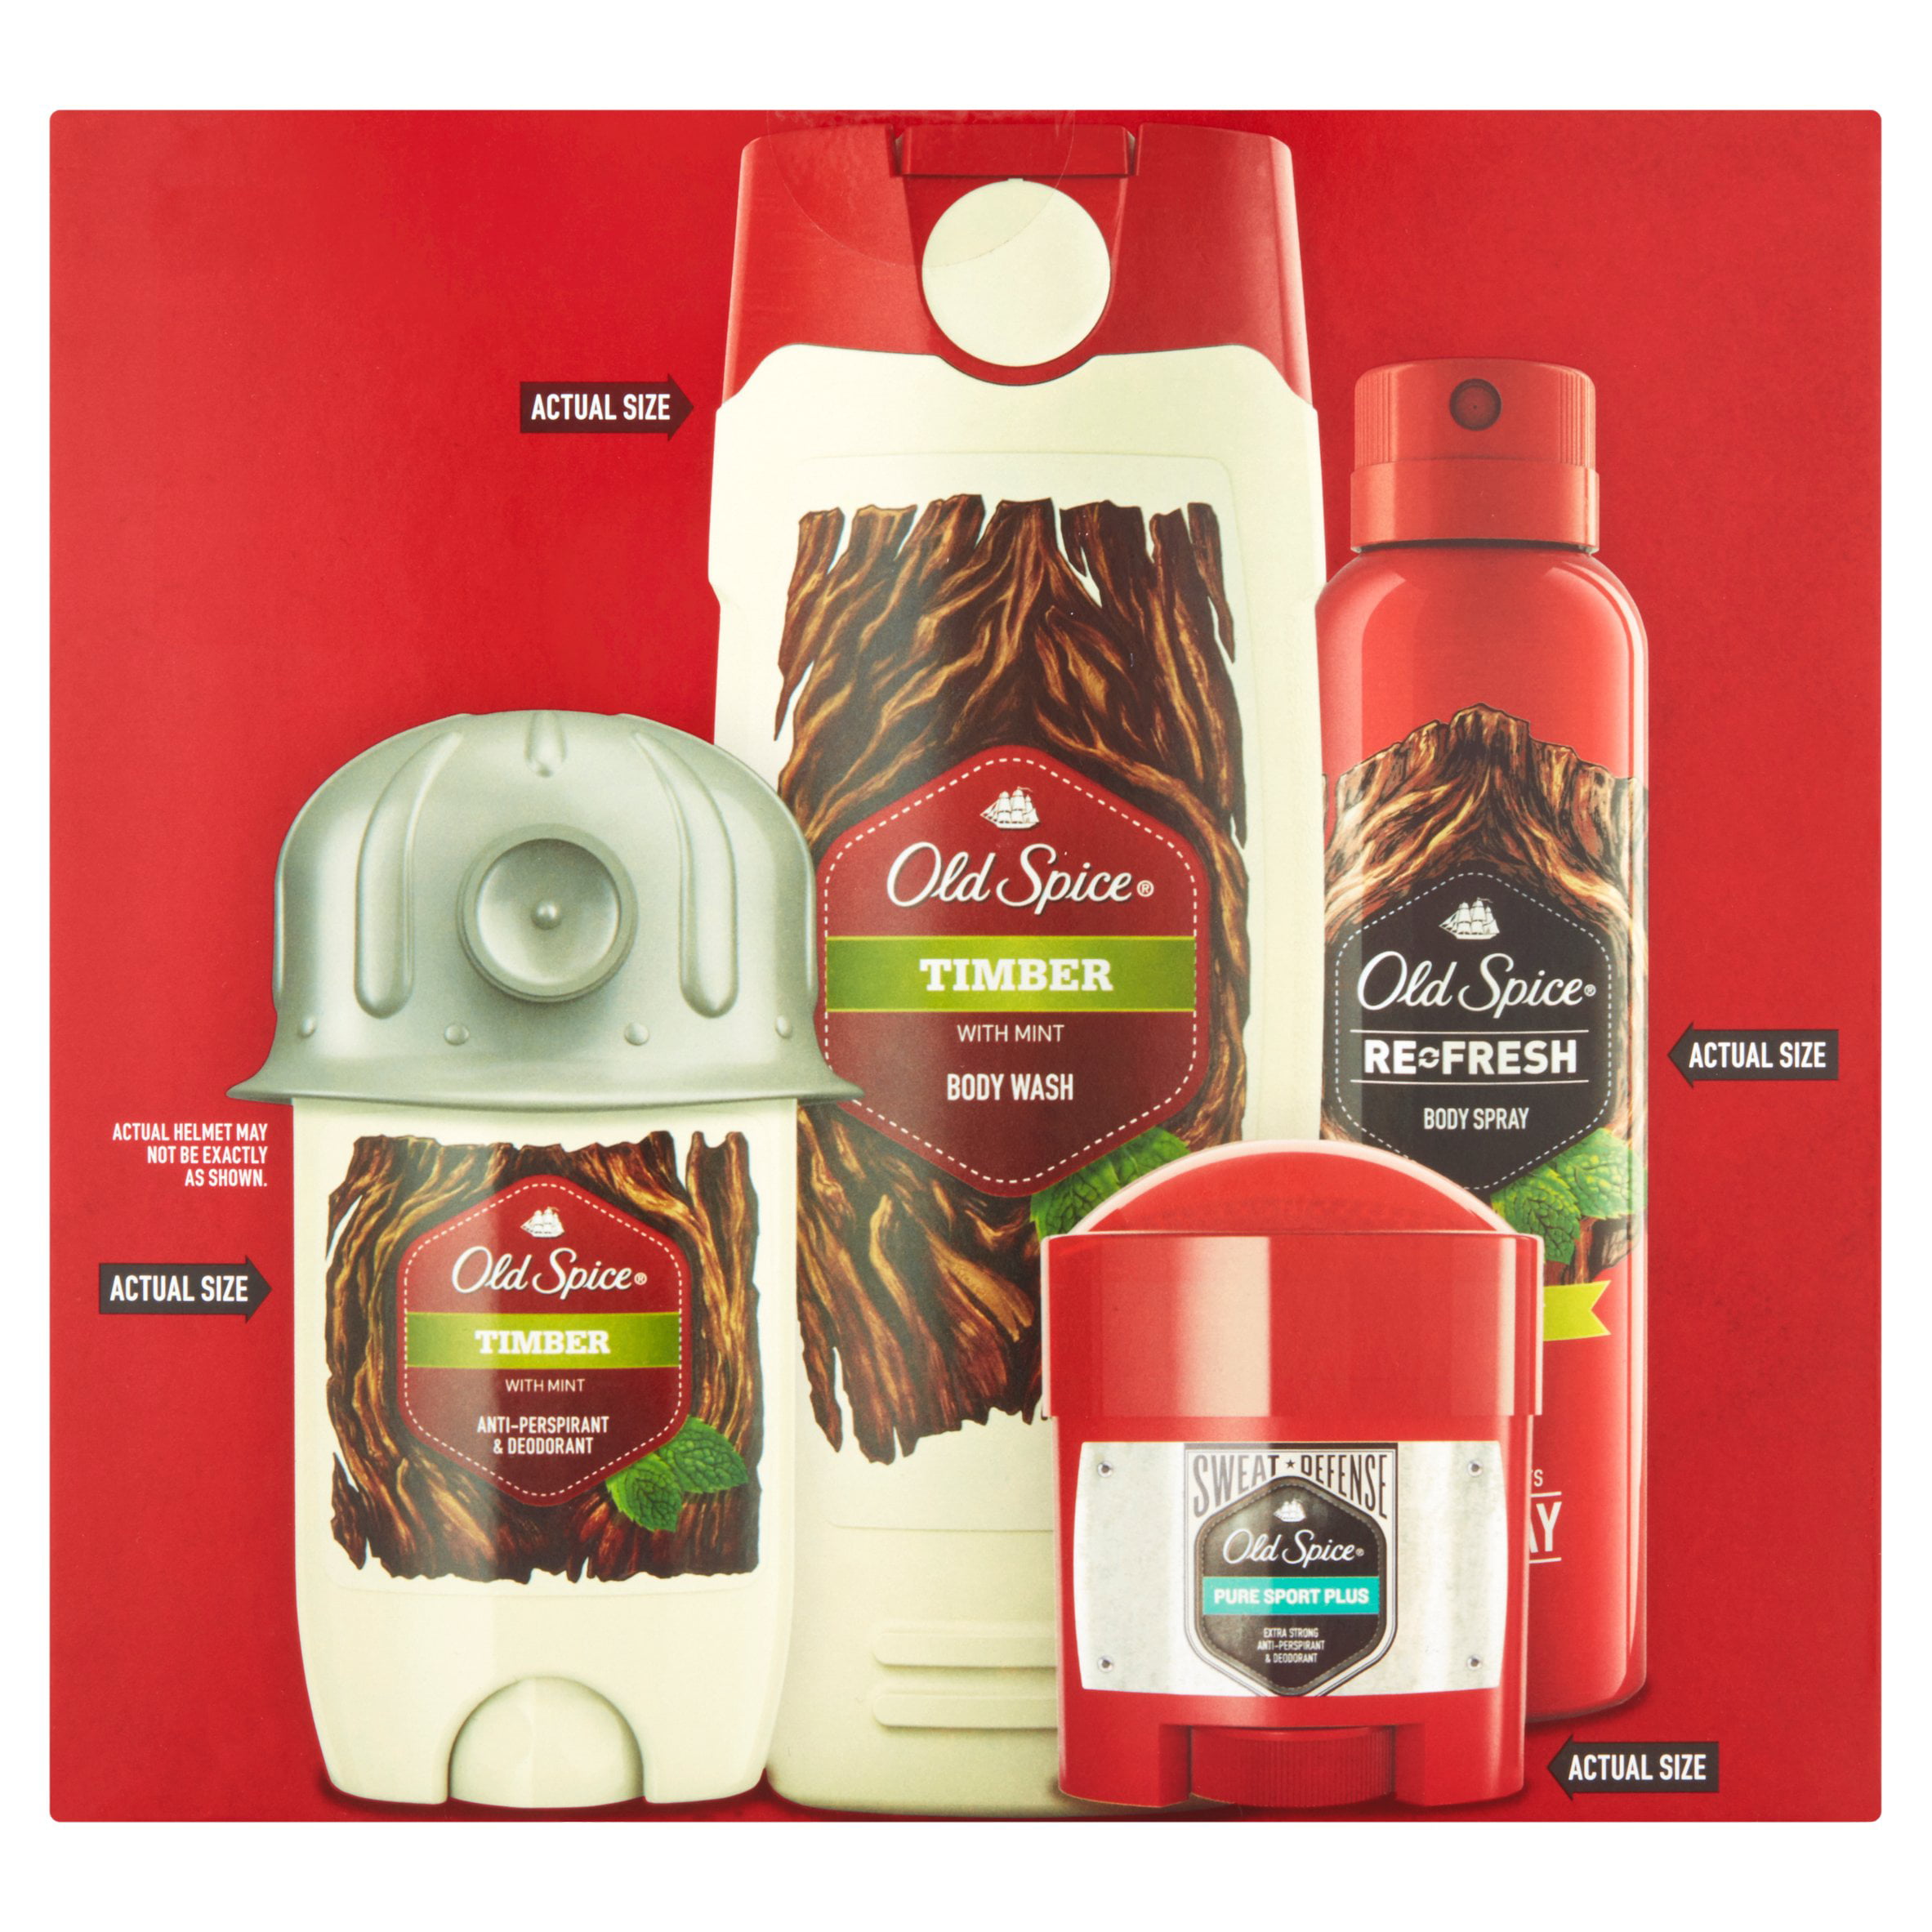 Buy Old Spice Timber Deodorant For Men 140ml Online at Low Prices in India   Amazonin